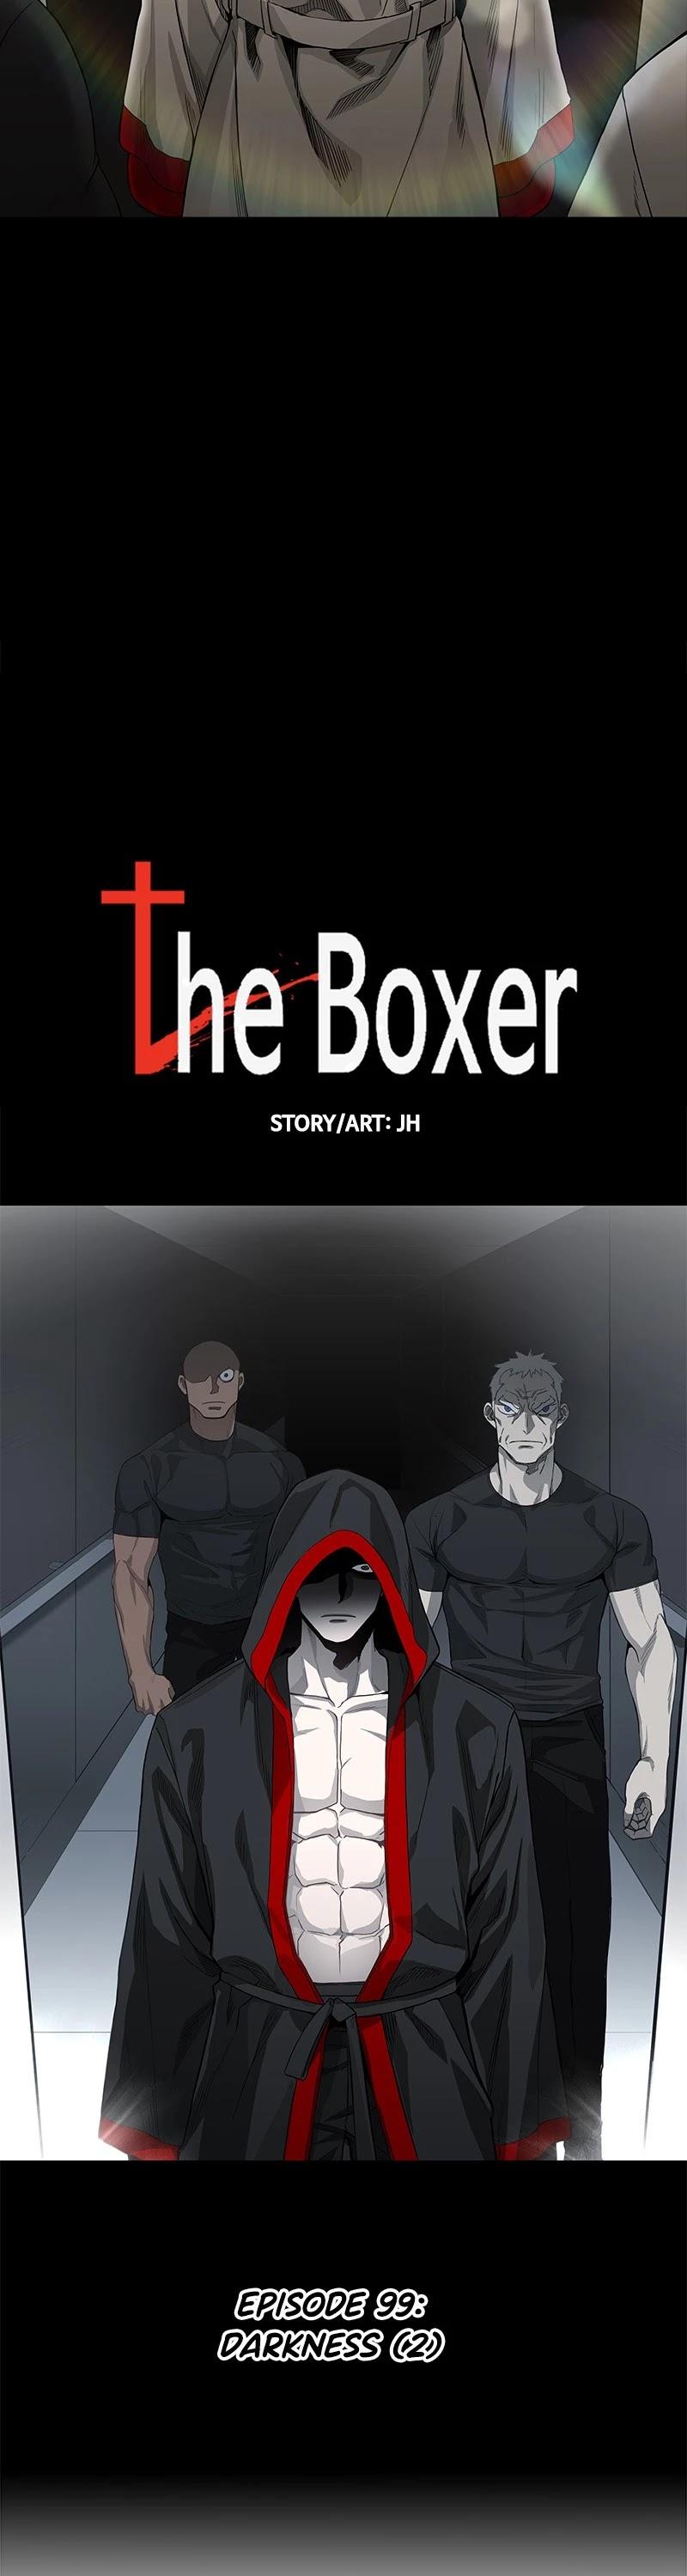 The Boxer Chapter 109: Ep. 99 - Darkness (2) page 13 - 